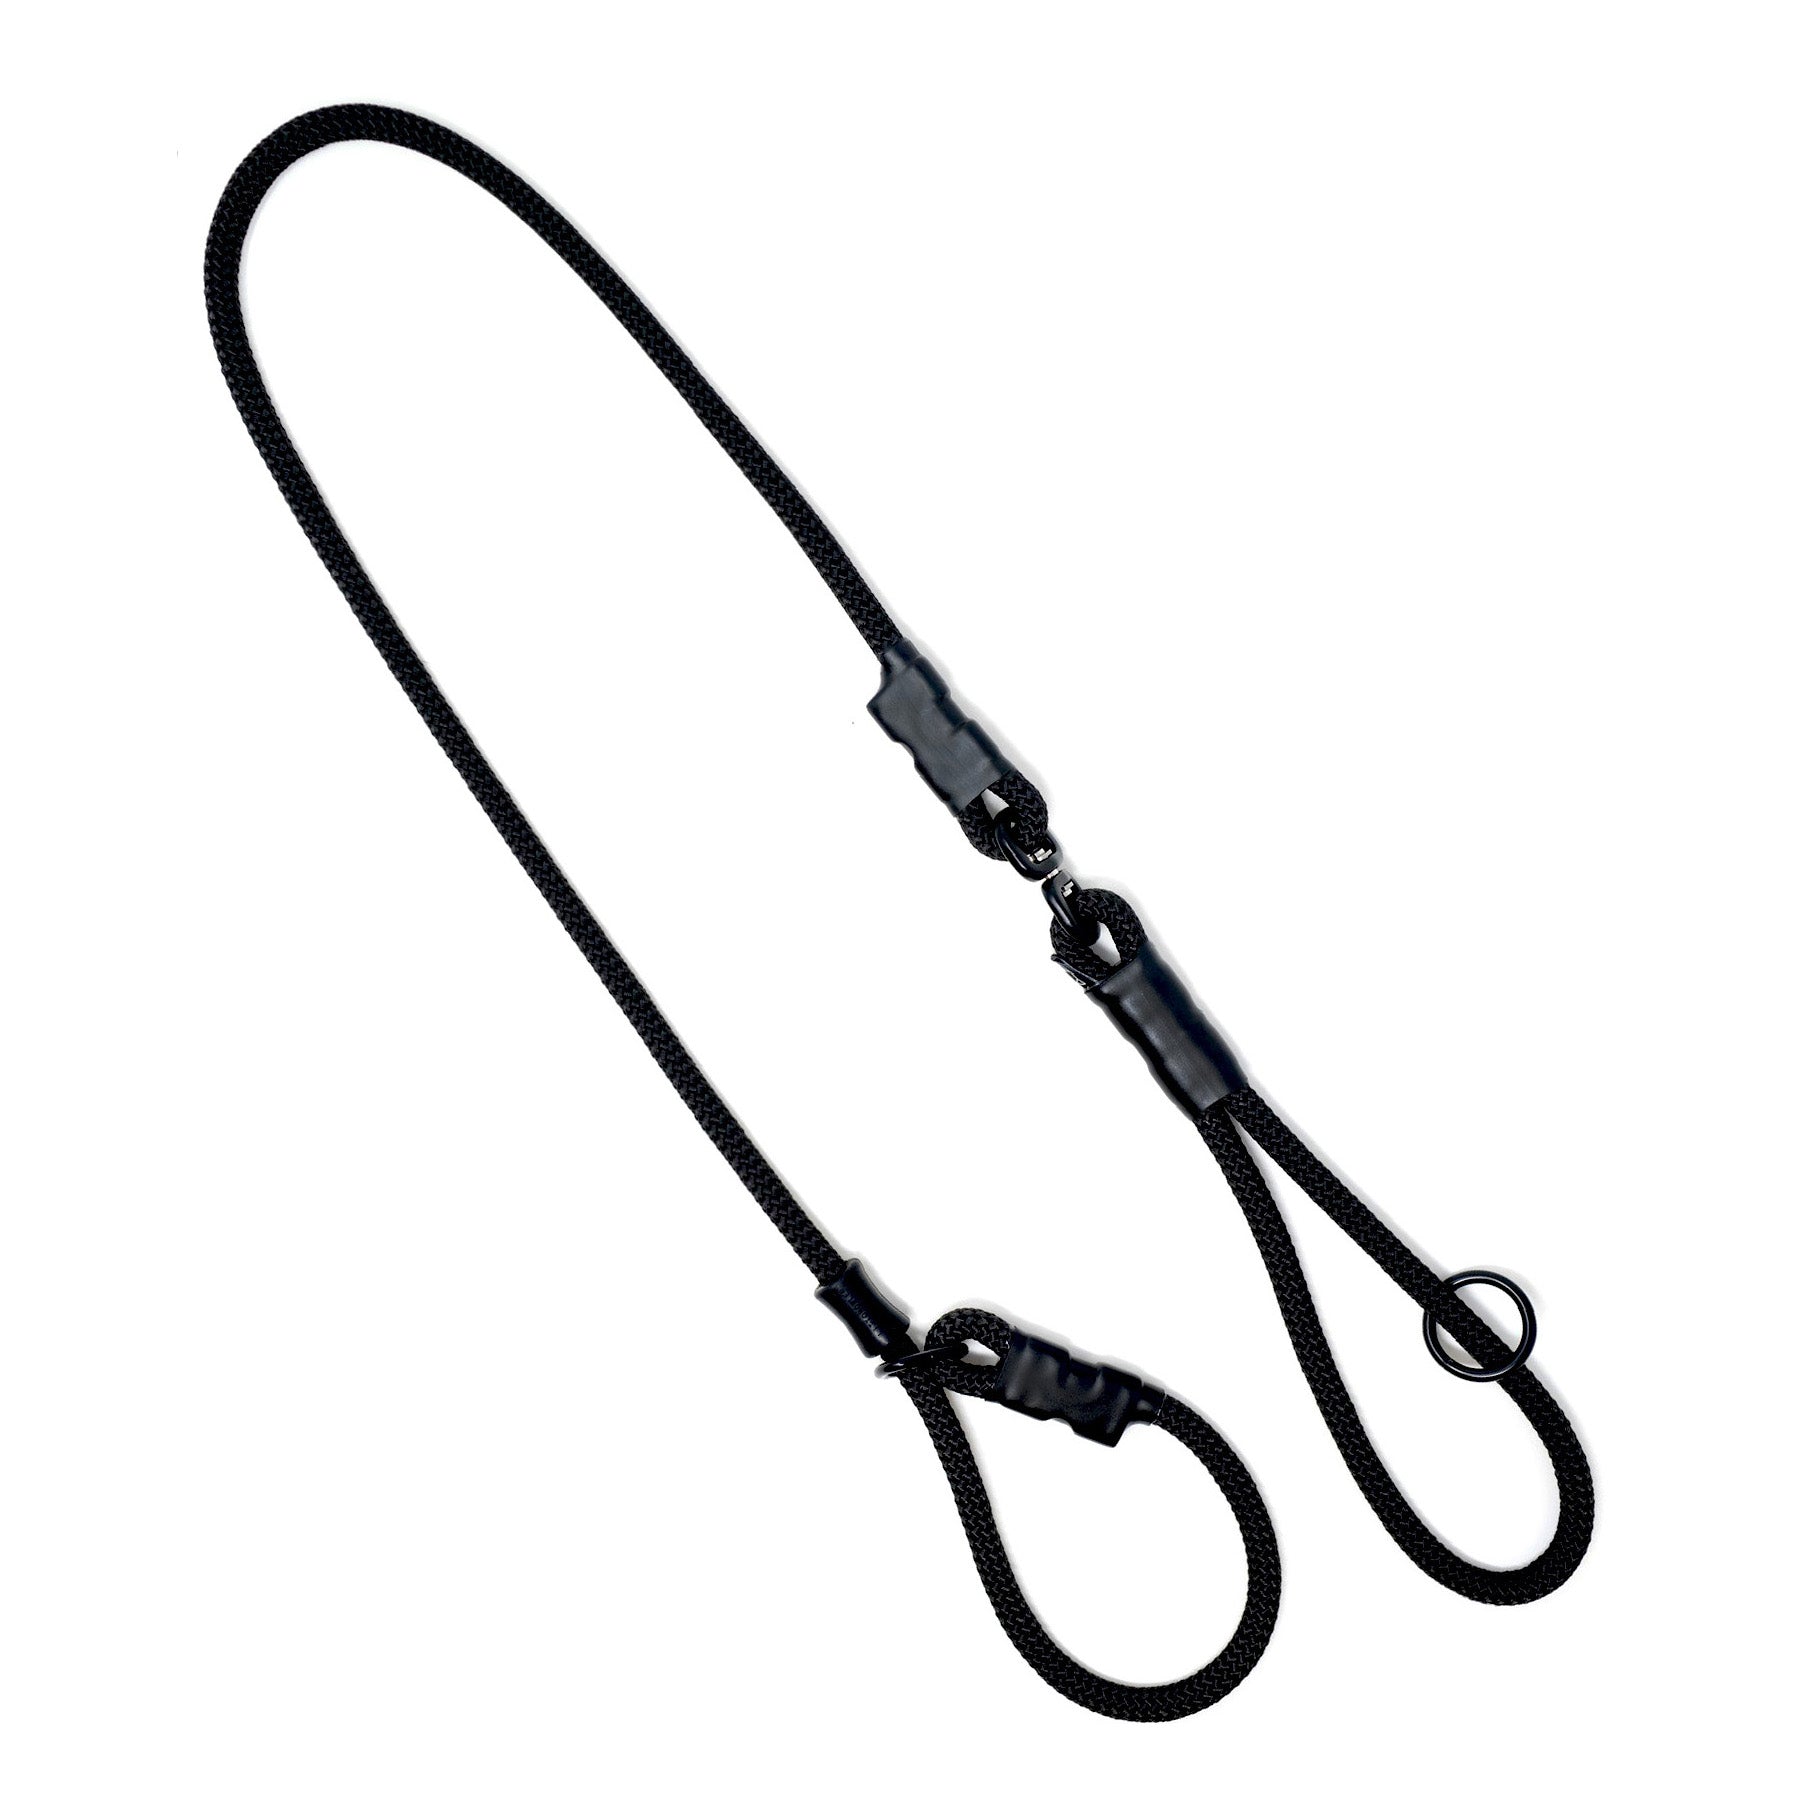 Slip leash made from climbing rope. There is an o-ring on the handle and a swivel for the leash to be tangle free. There is a silicone stopper for strength and durability. 